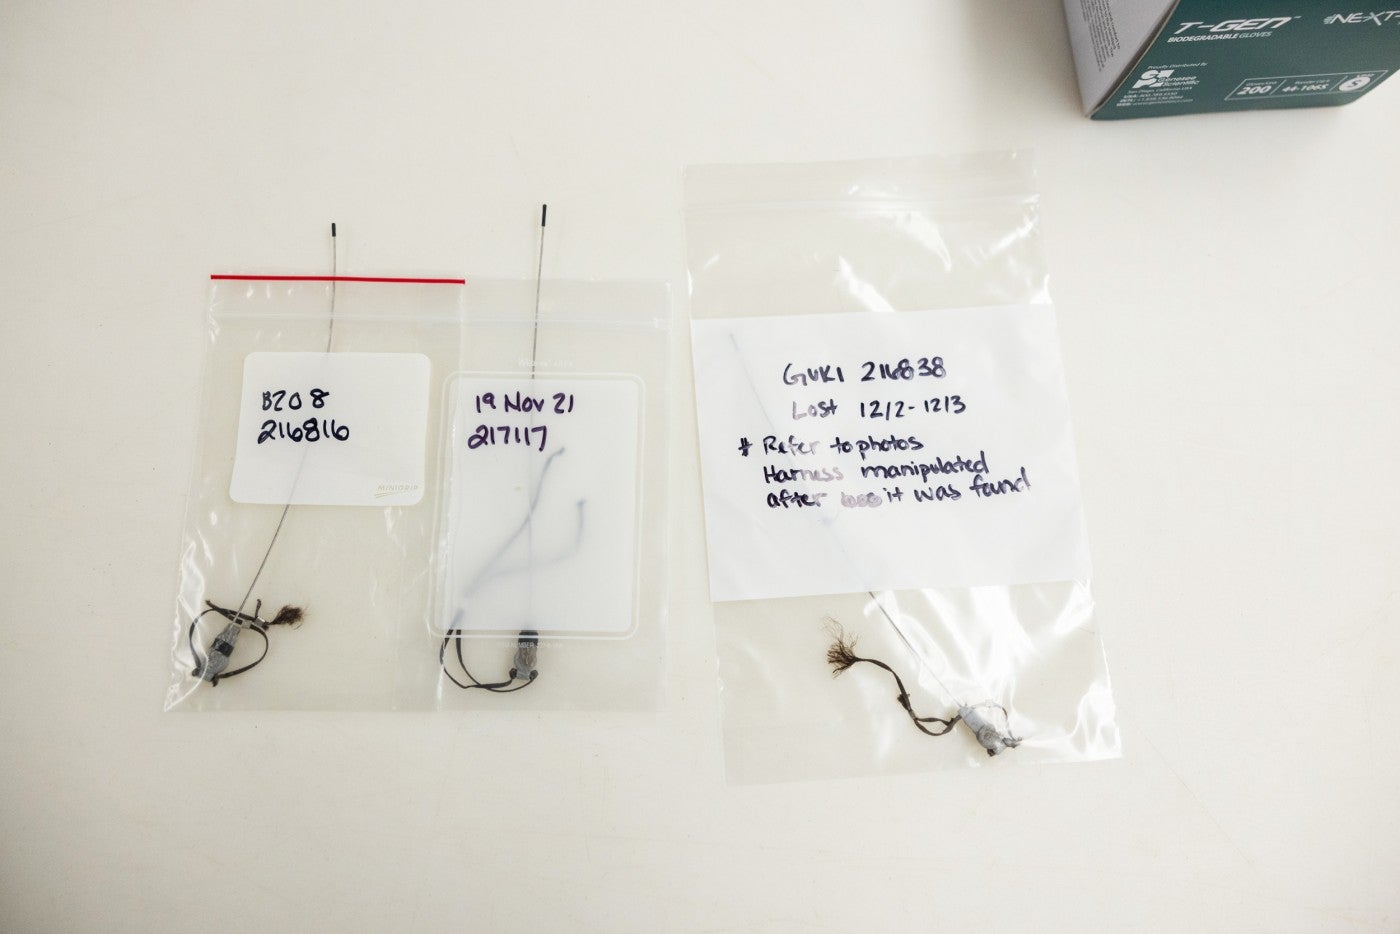 Three Guam kingfisher tracking harnesses stored in individual plastic bags atop a table